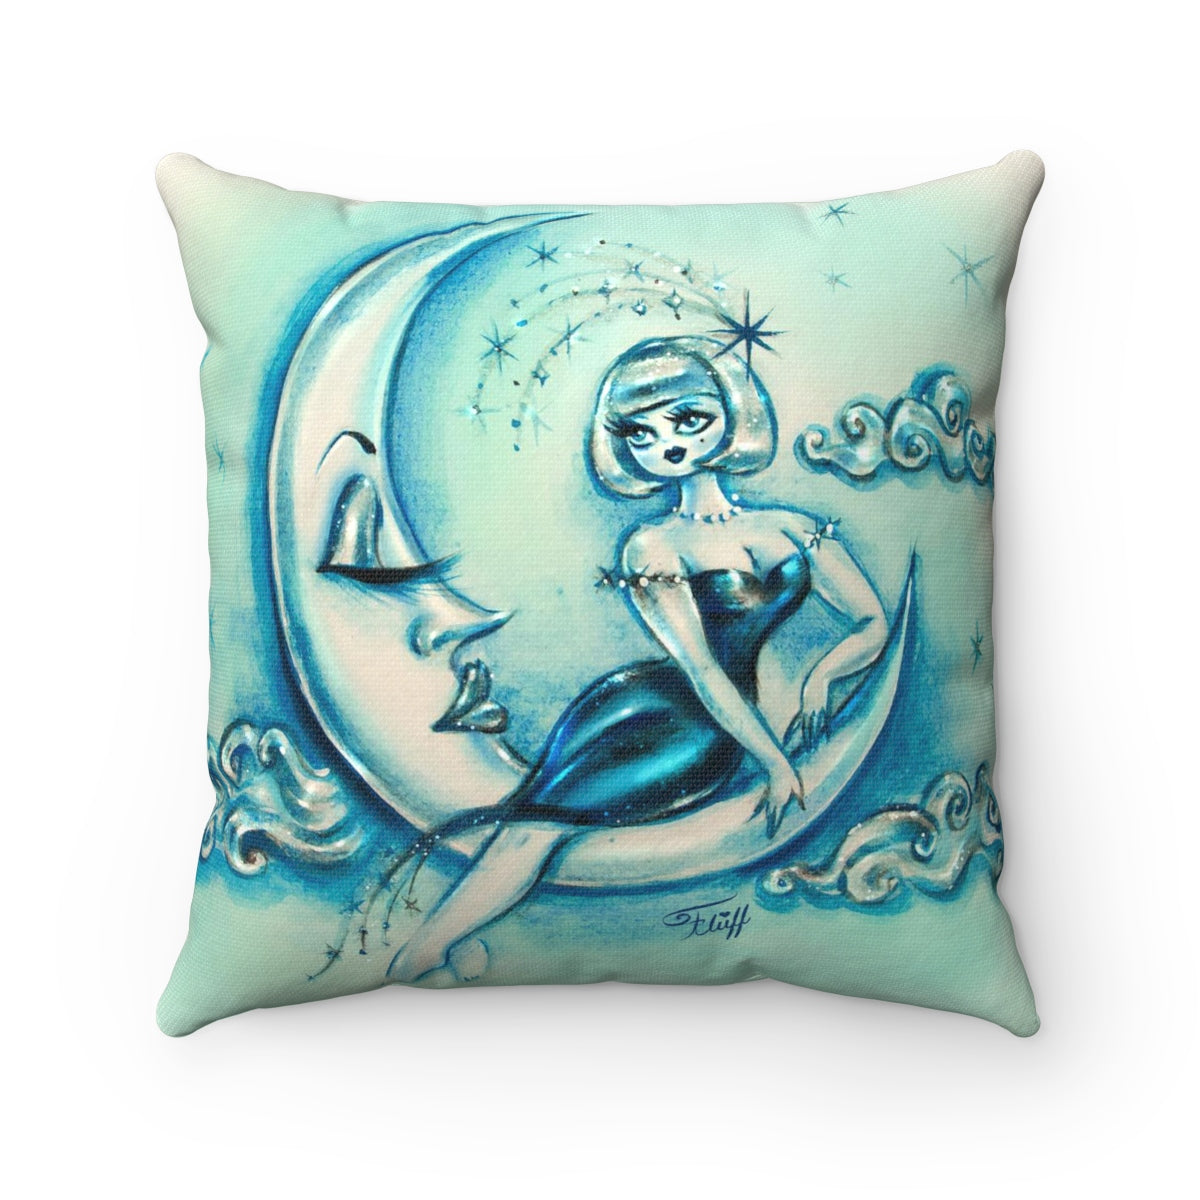 Girl on the Moon • Square Pillow